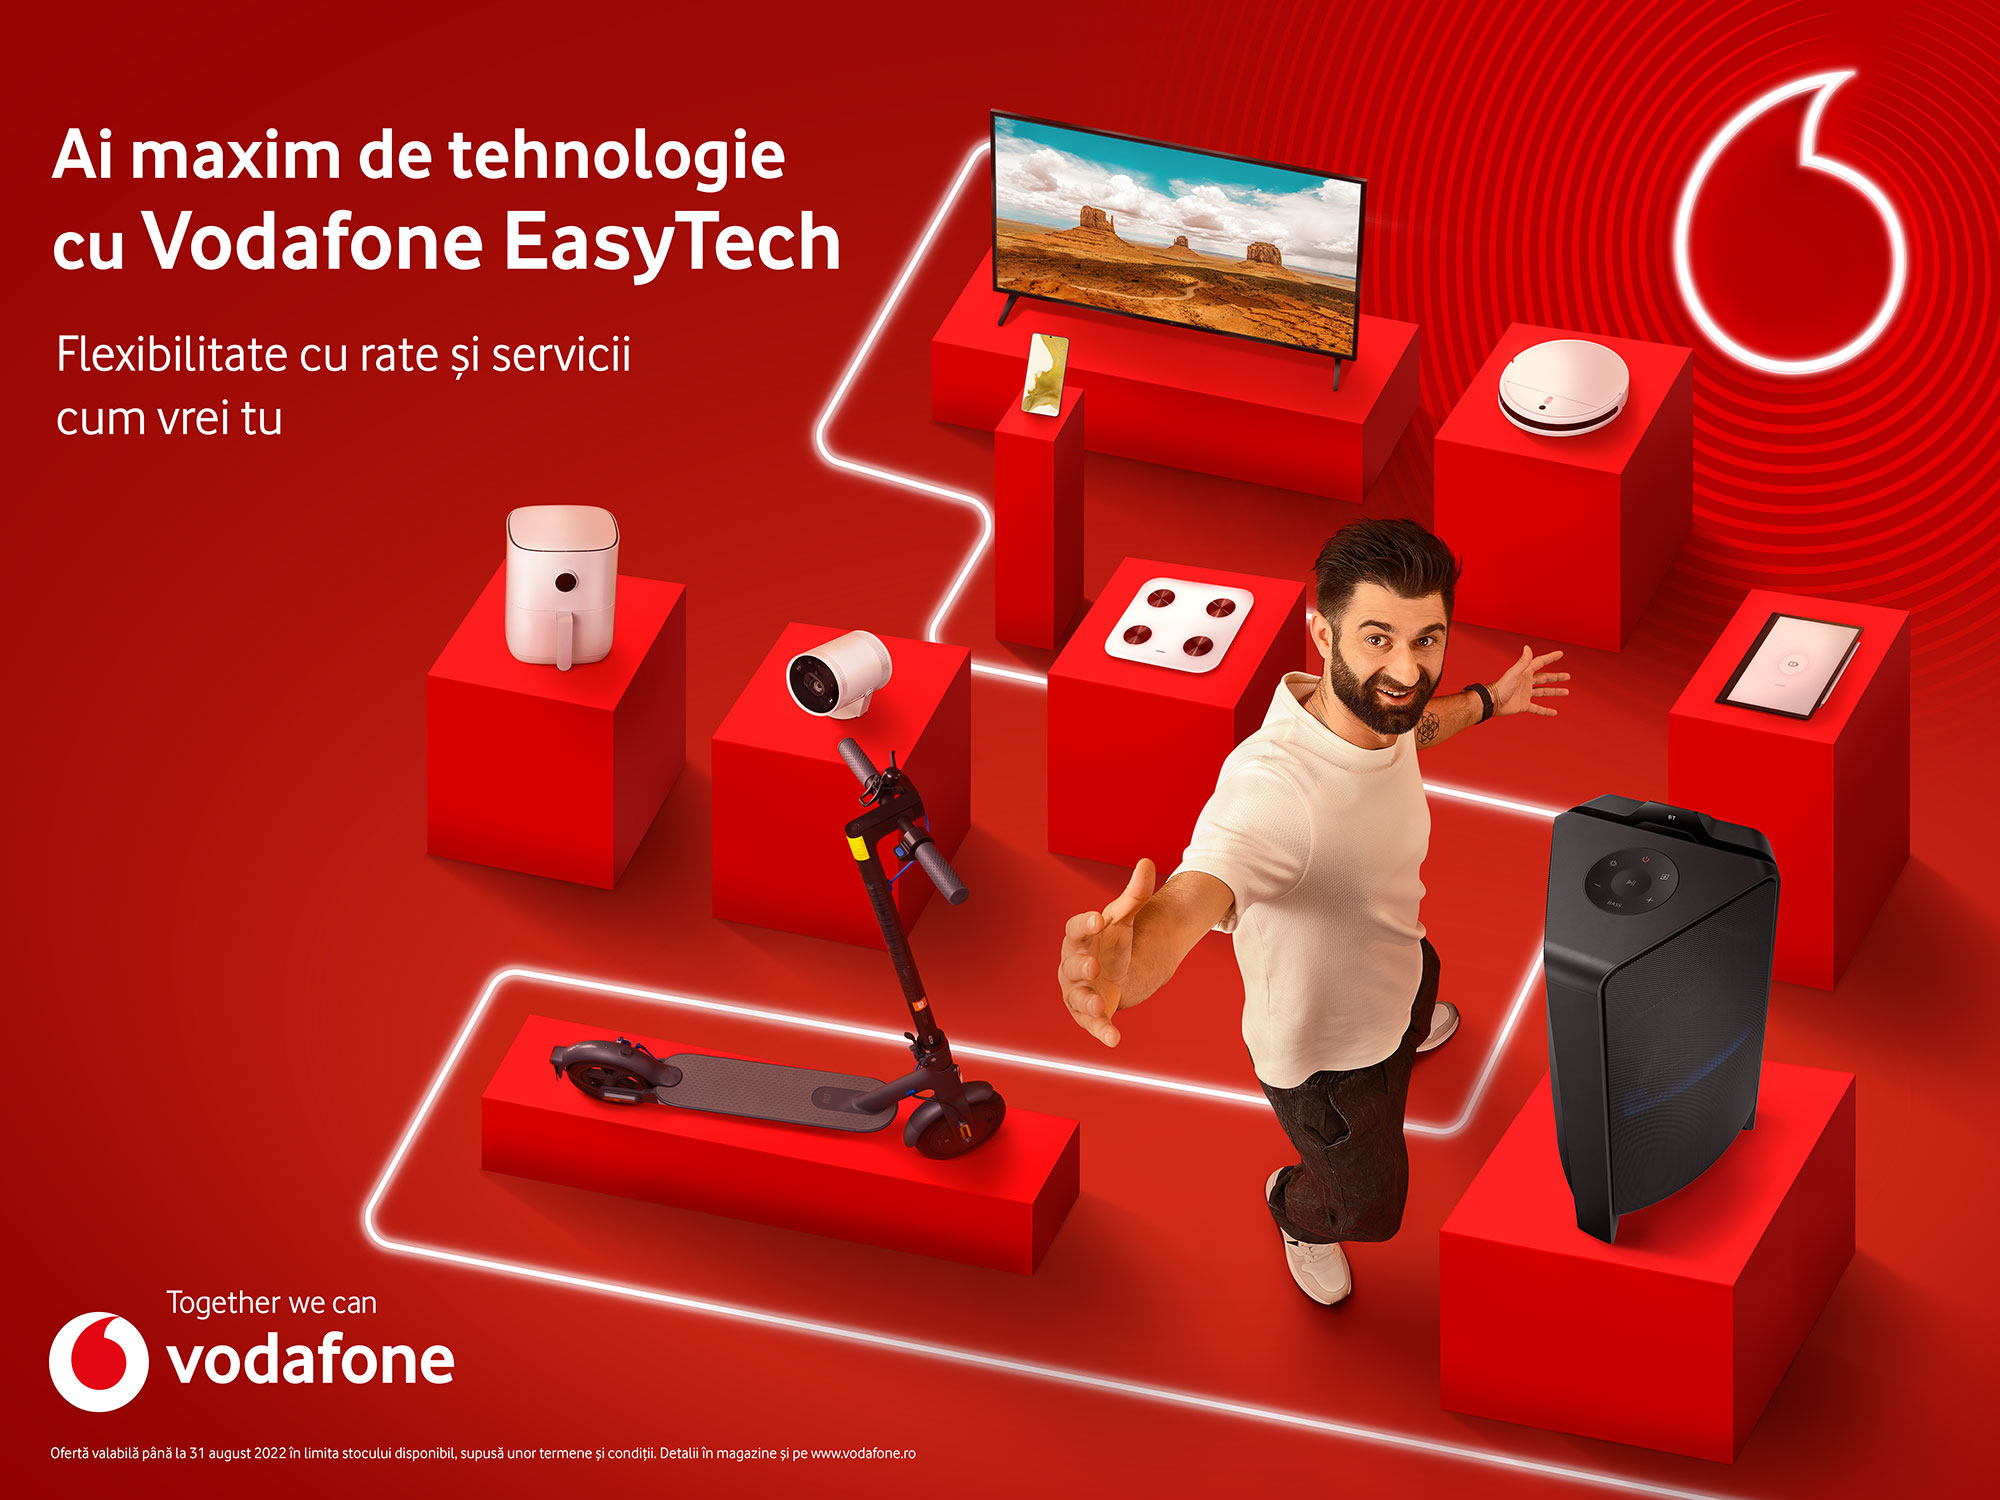 Vodafone becomes one stop shop for technology and services with EasyTech platform